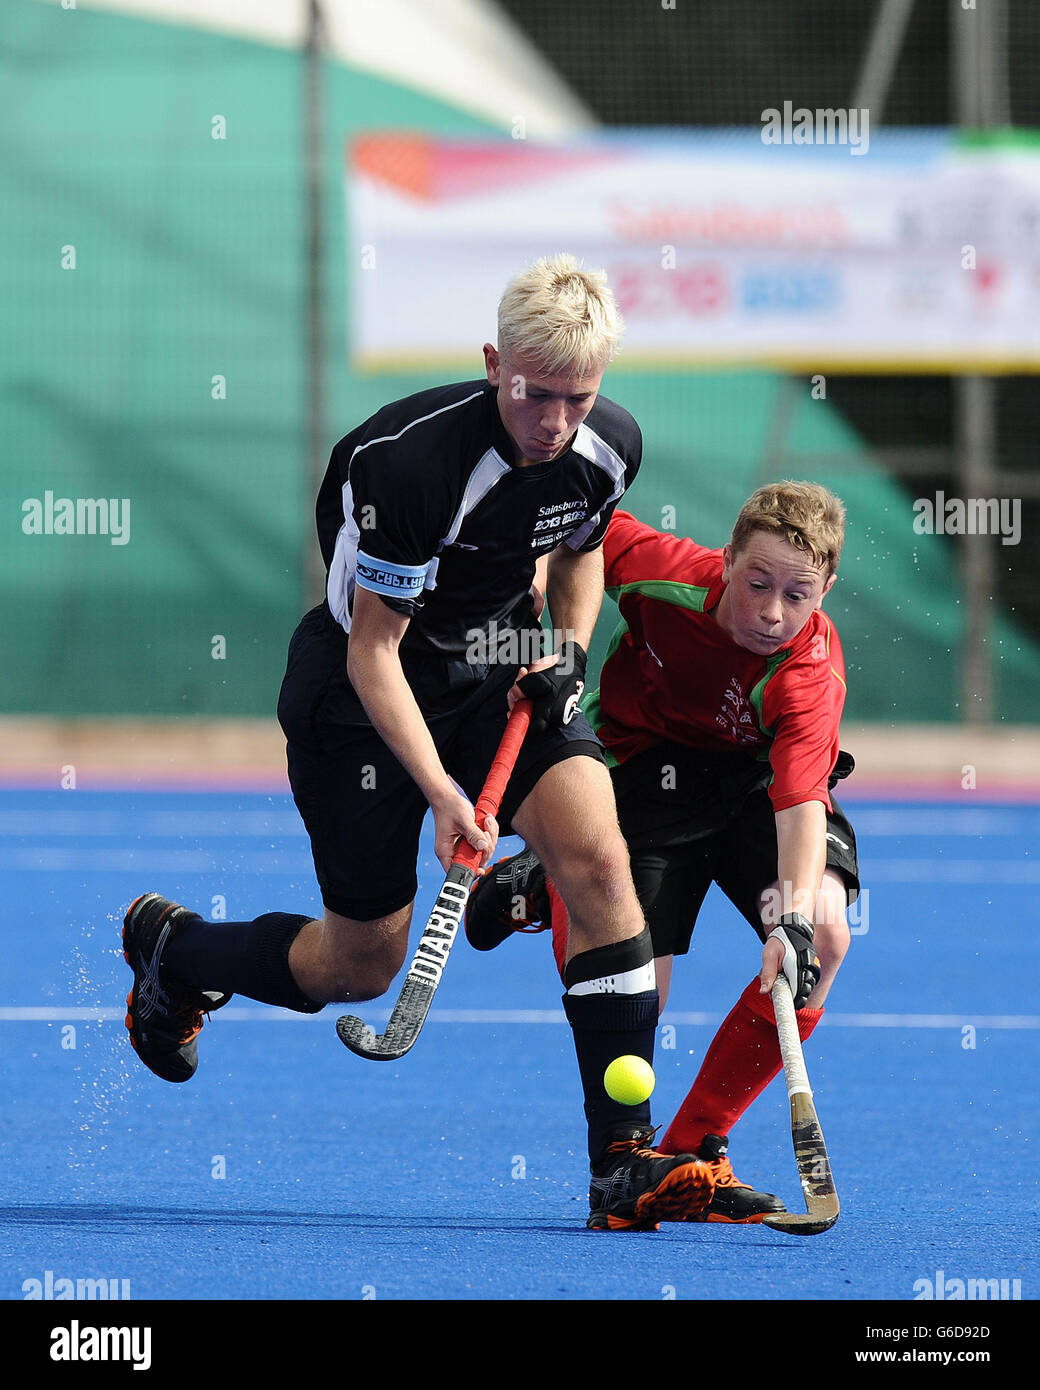 Scotland's Aiden McQuade is tackled by Wales' Tom Peters in the Boy's Hockey competition during day two of the 2013 Sainsbury's School Games at the Abbeydale Sports Ground, Sheffield. Stock Photo